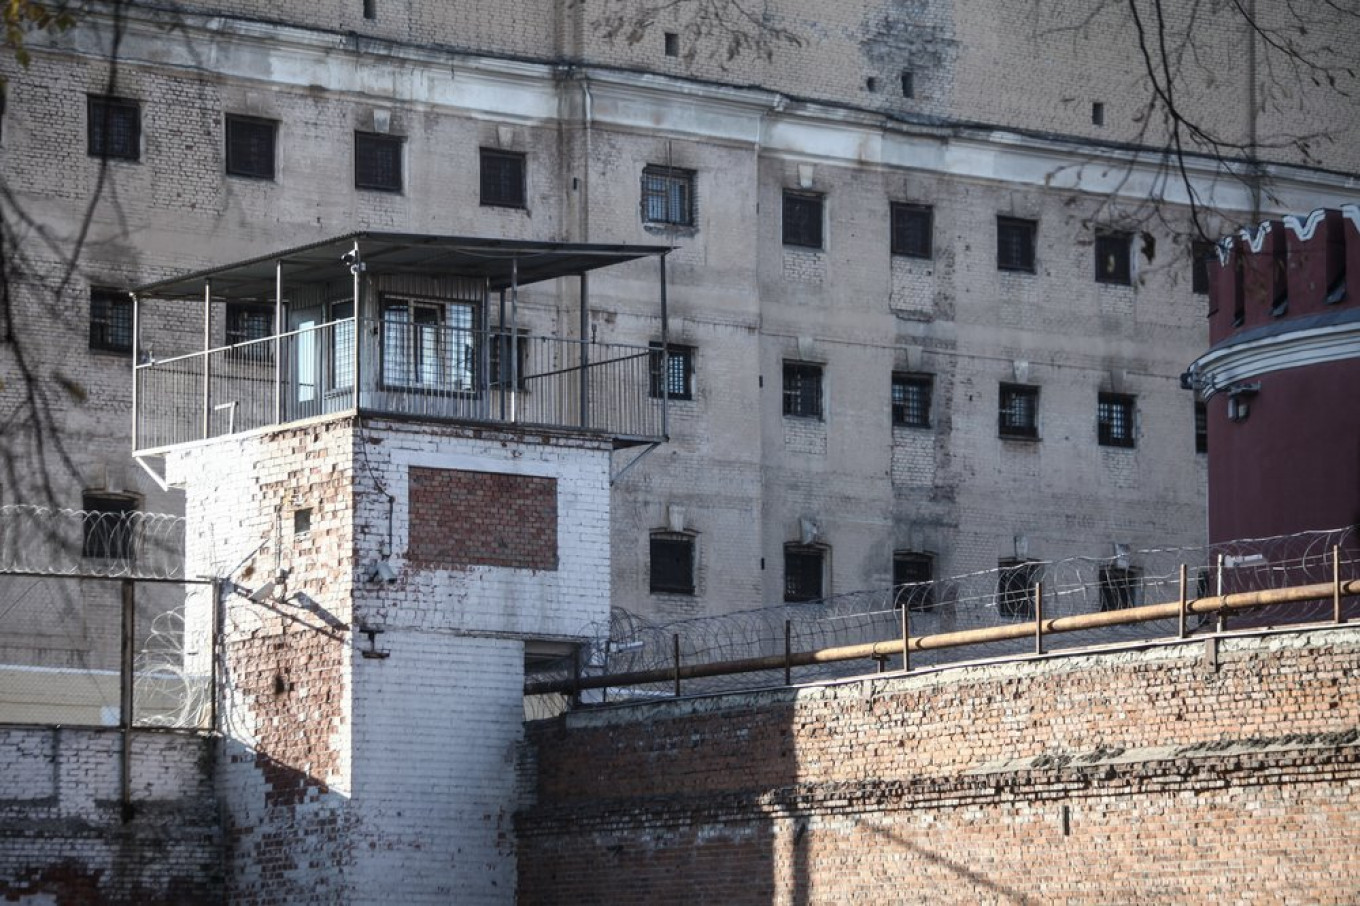 Inmates Discovered in Long-Abandoned Moscow Prison Tower – Watchdog